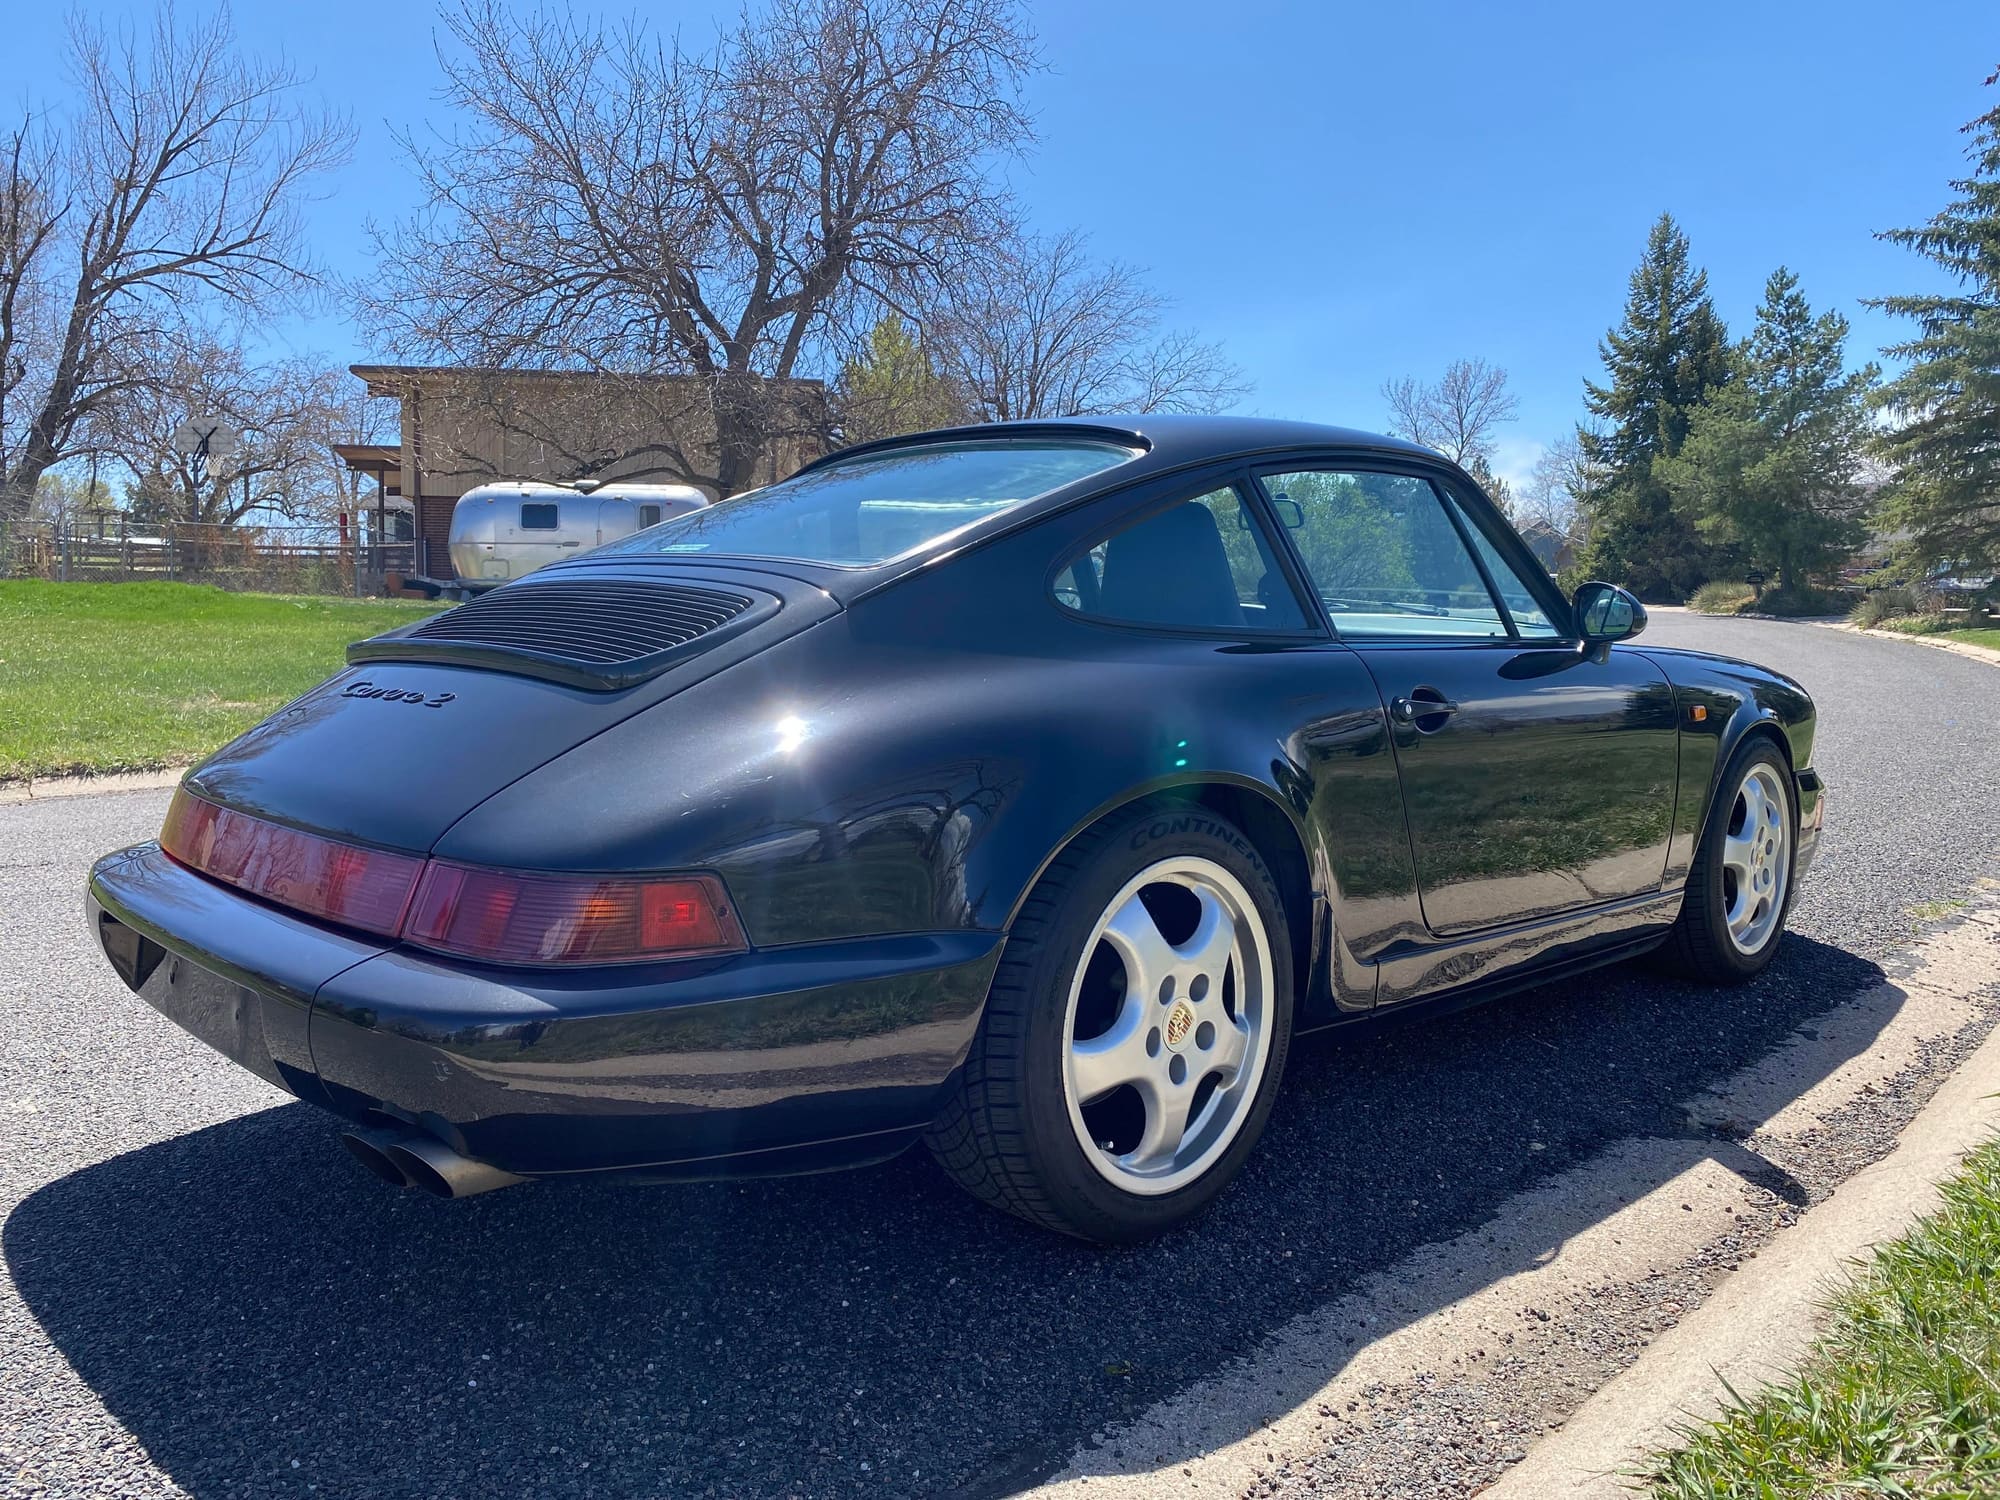 1990 Porsche 911 - 1990 ROW 964 Carrera 2 - Used - VIN WP0ZZZ96ZLS404418 - 66,362 Miles - 6 cyl - 2WD - Manual - Coupe - Black - Fort Collins, CO 80525, United States